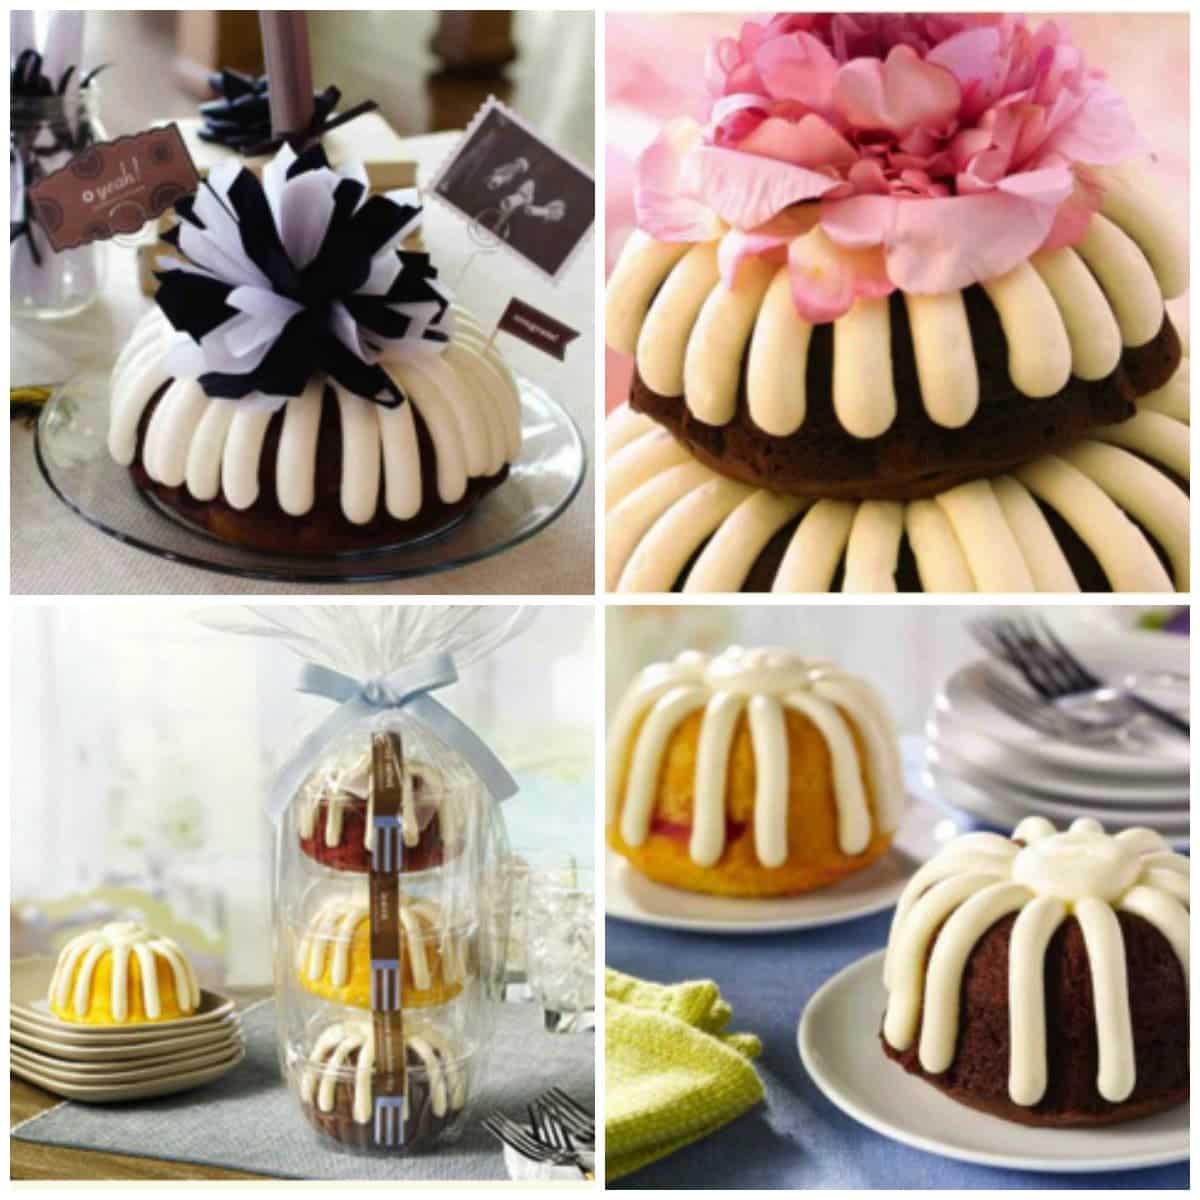 Nothing Bundt Cakes Brings Sweet Smell of Success to Stony Creek ...